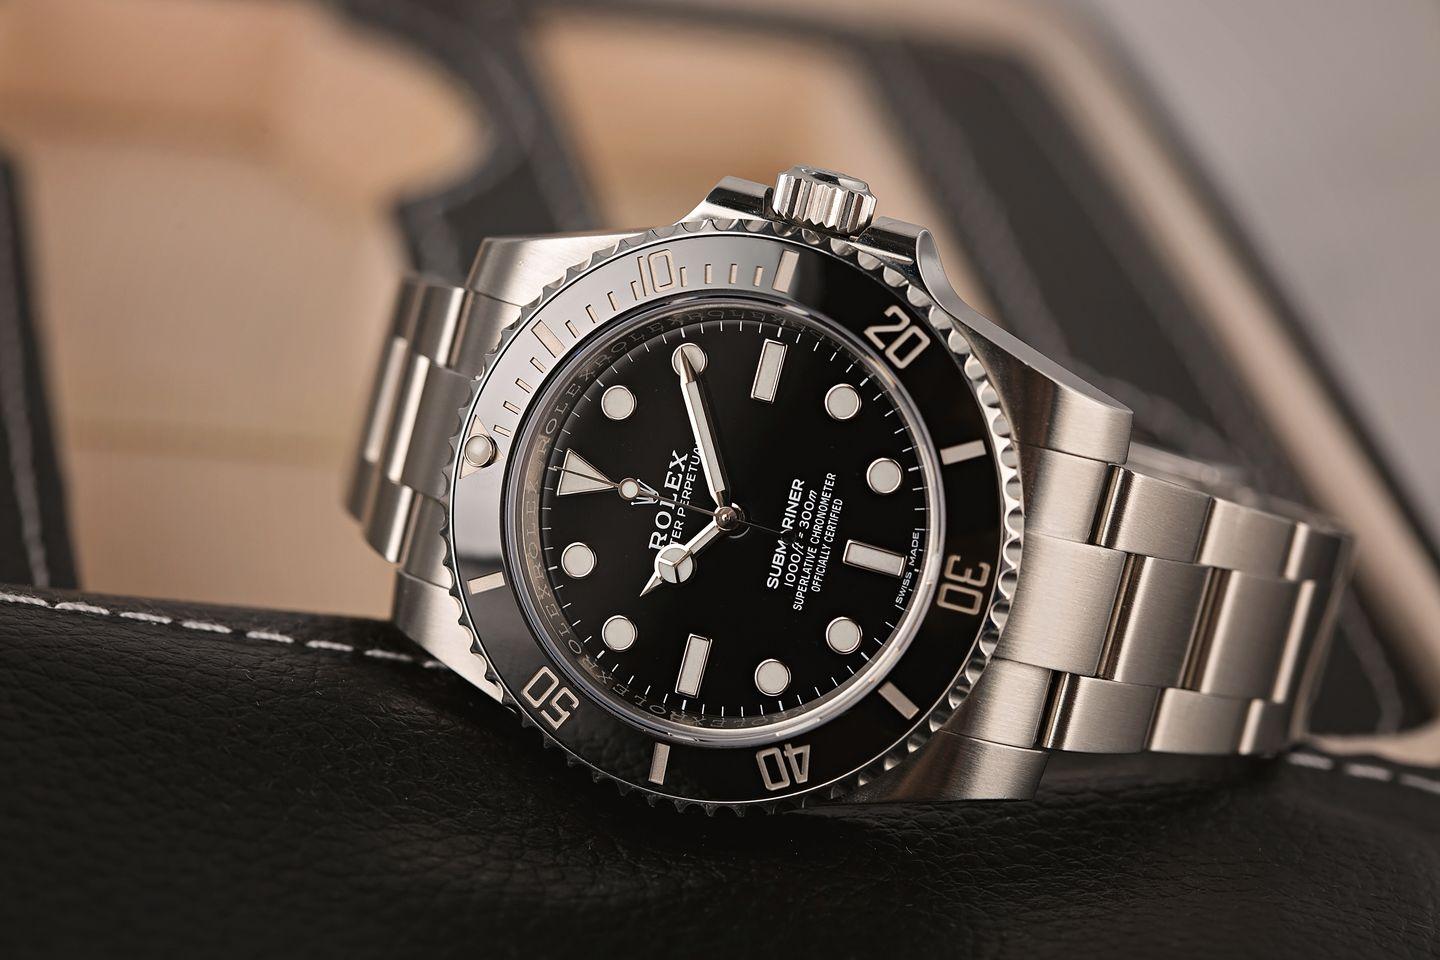 Rolex Watches Submariner 114060 No-Date Personality Test